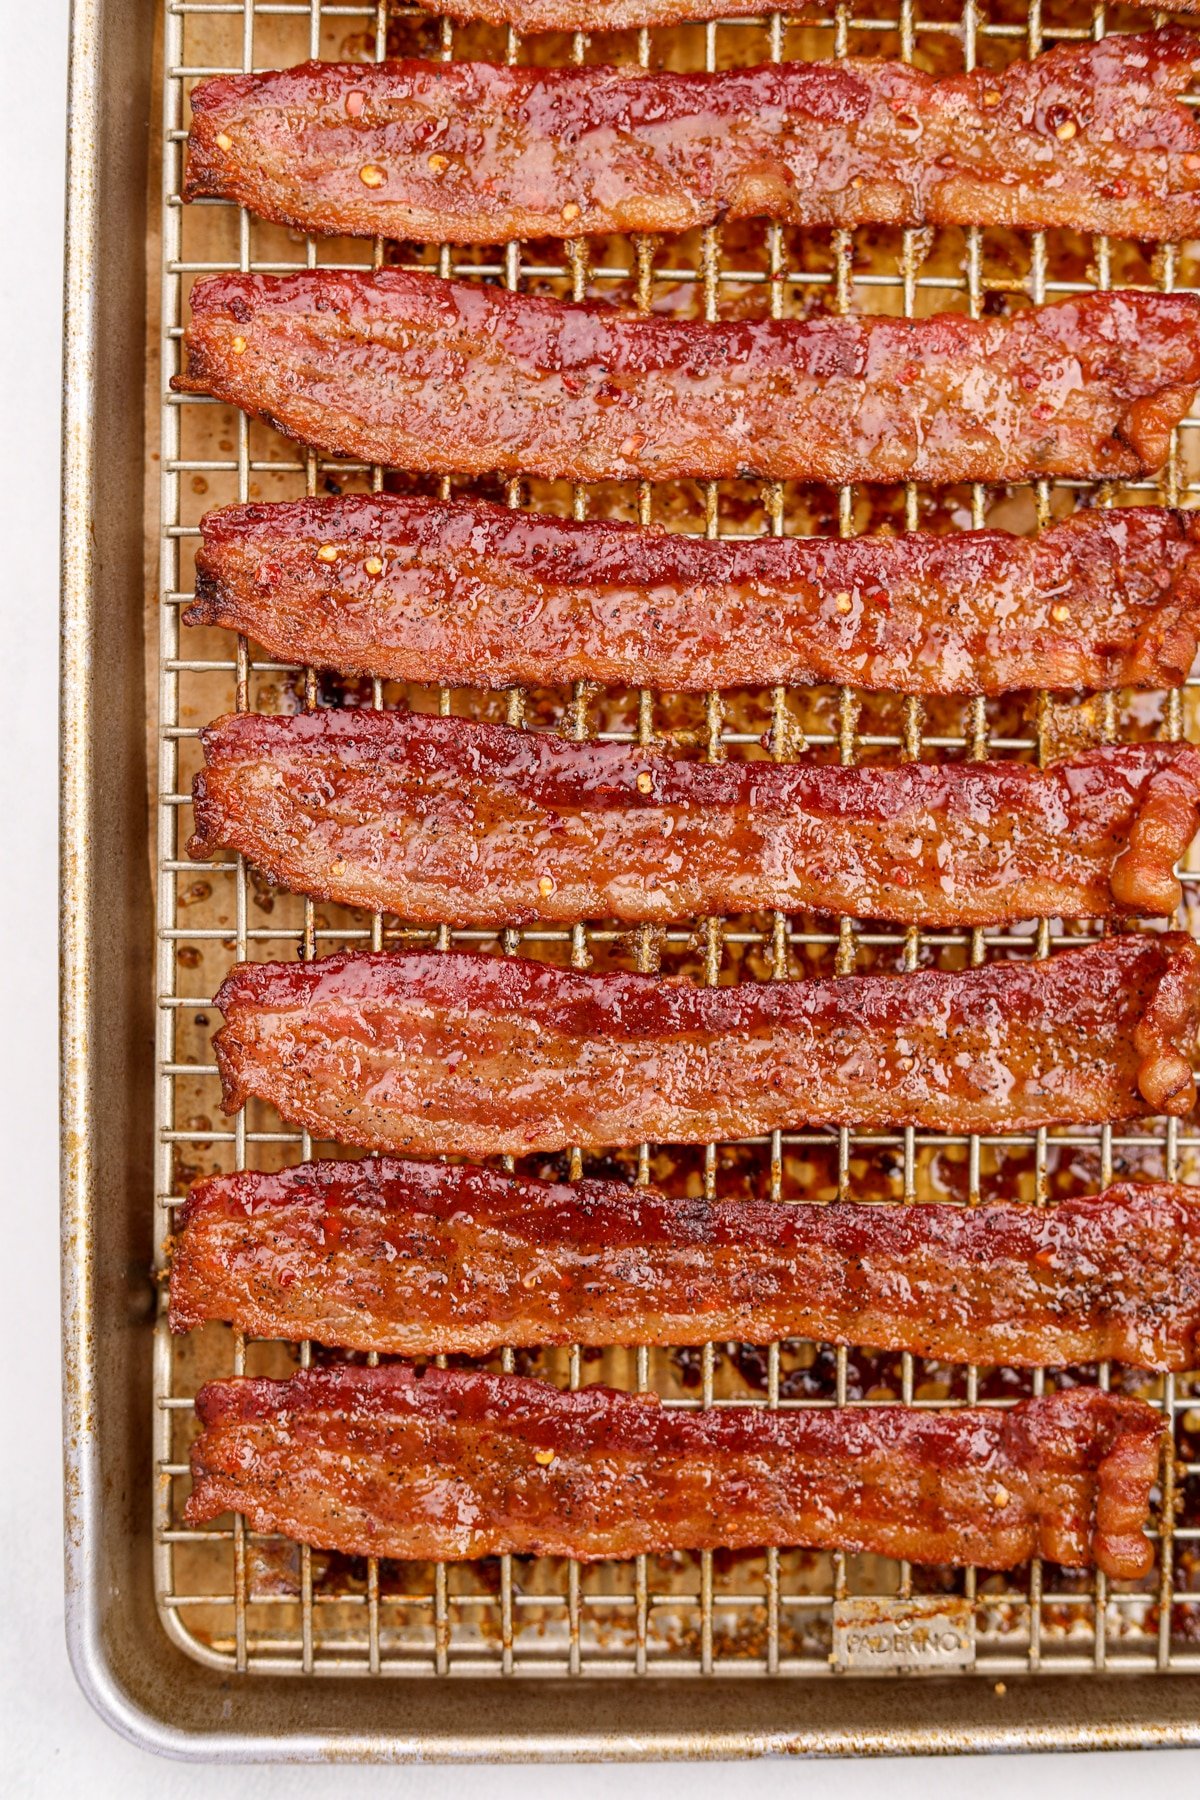 A baking sheet filled with cooked and candied bacon slices.